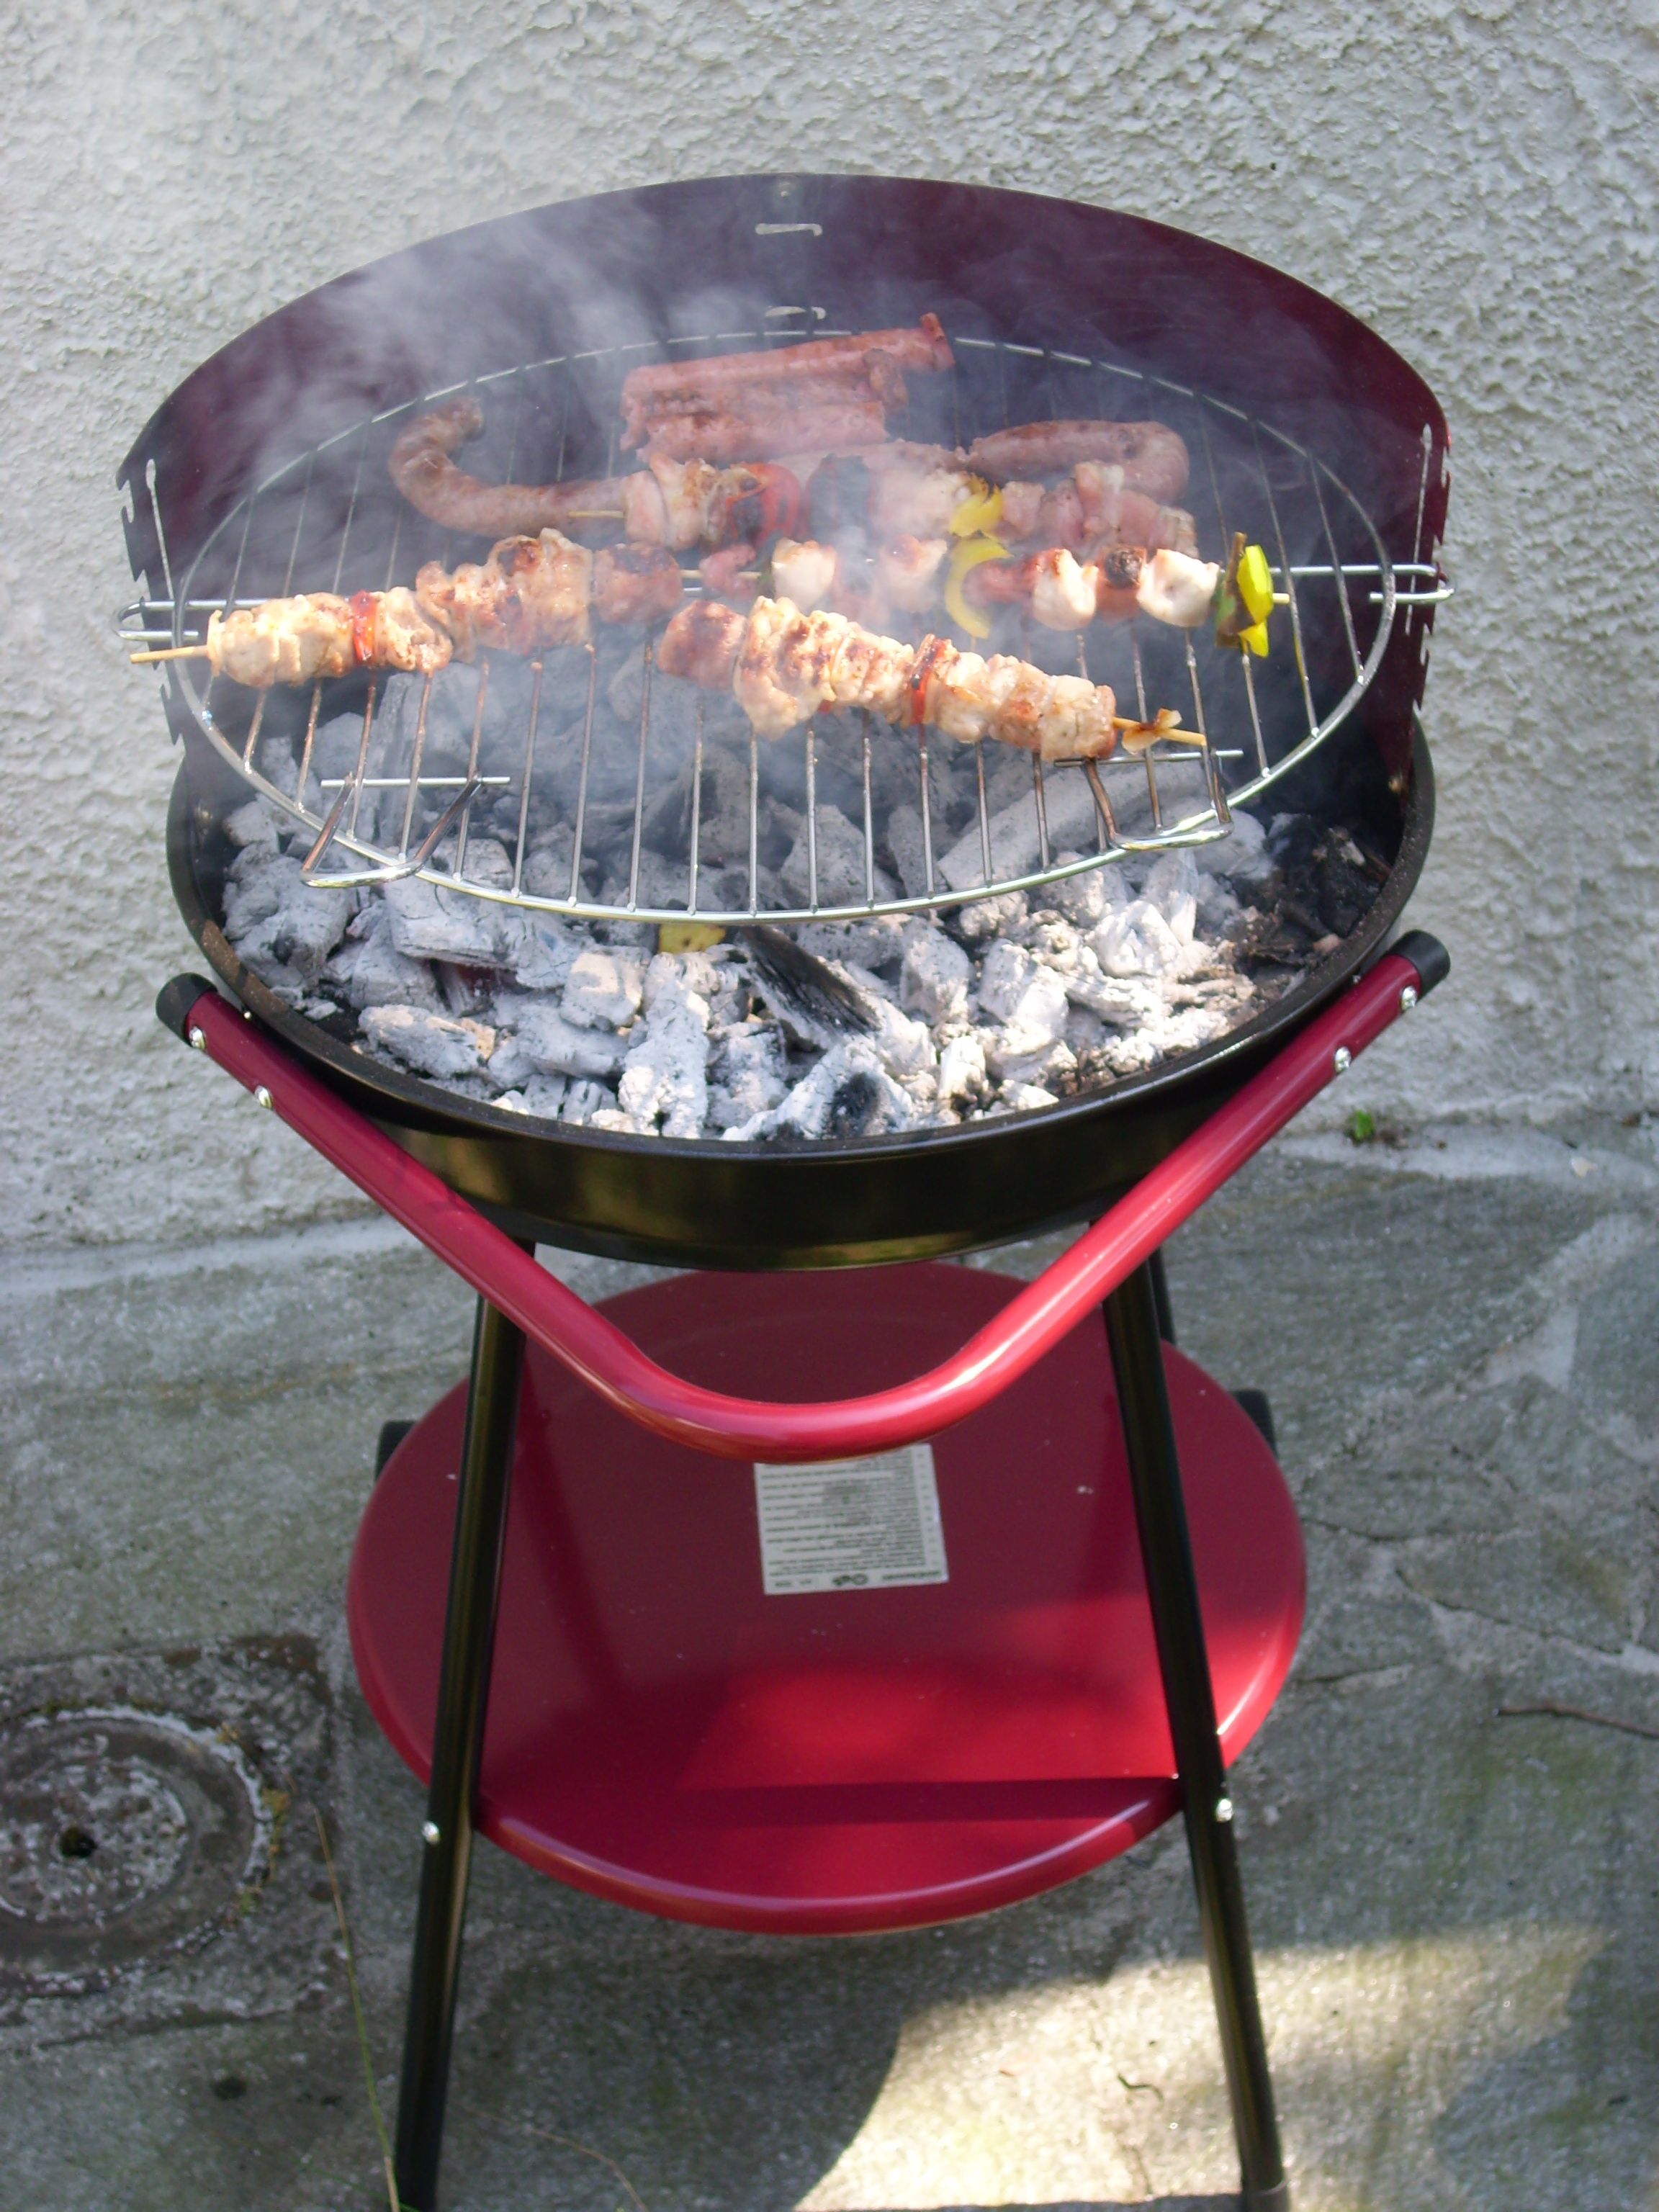 http://dic.academic.ru/pictures/wiki/files/66/Barbecue_griglia.jpg